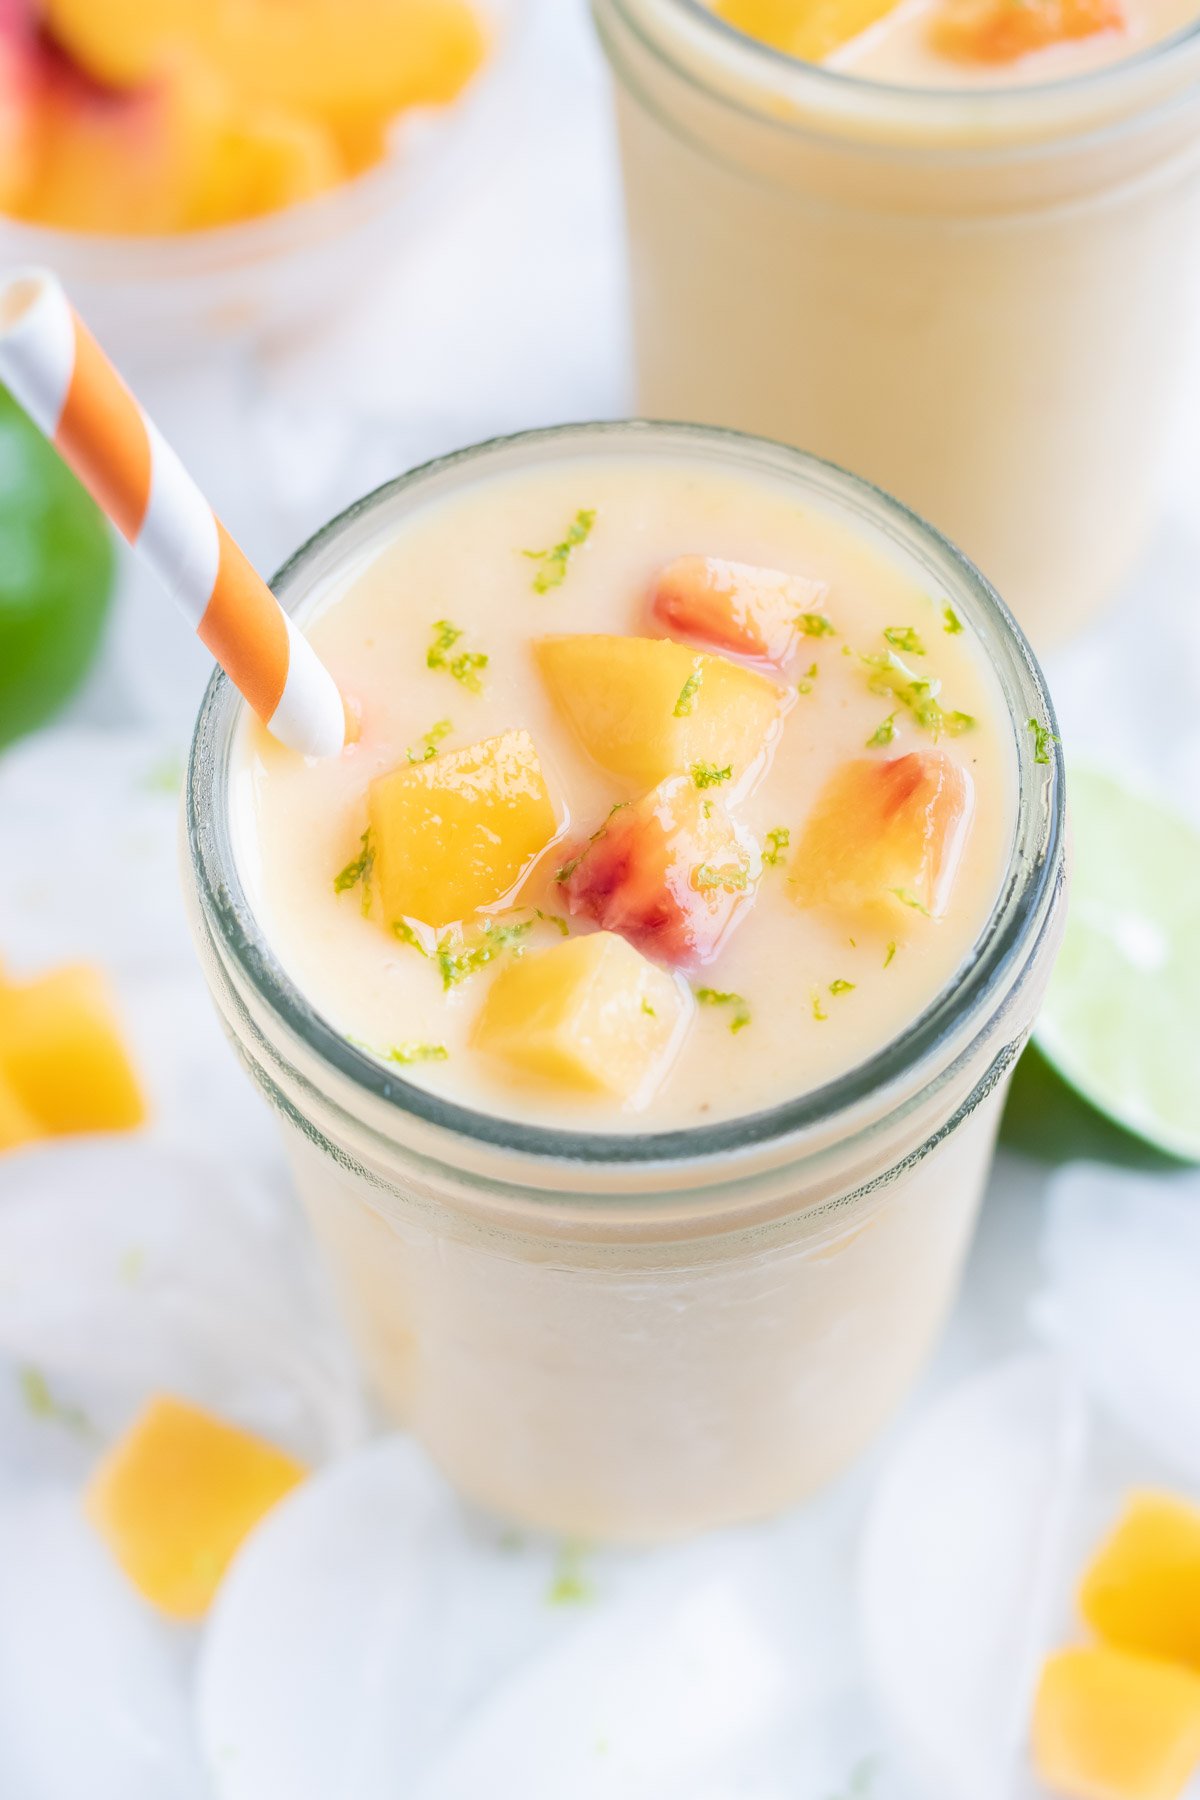 Thick and creamy peach shake is served in a glass cup with a straw.